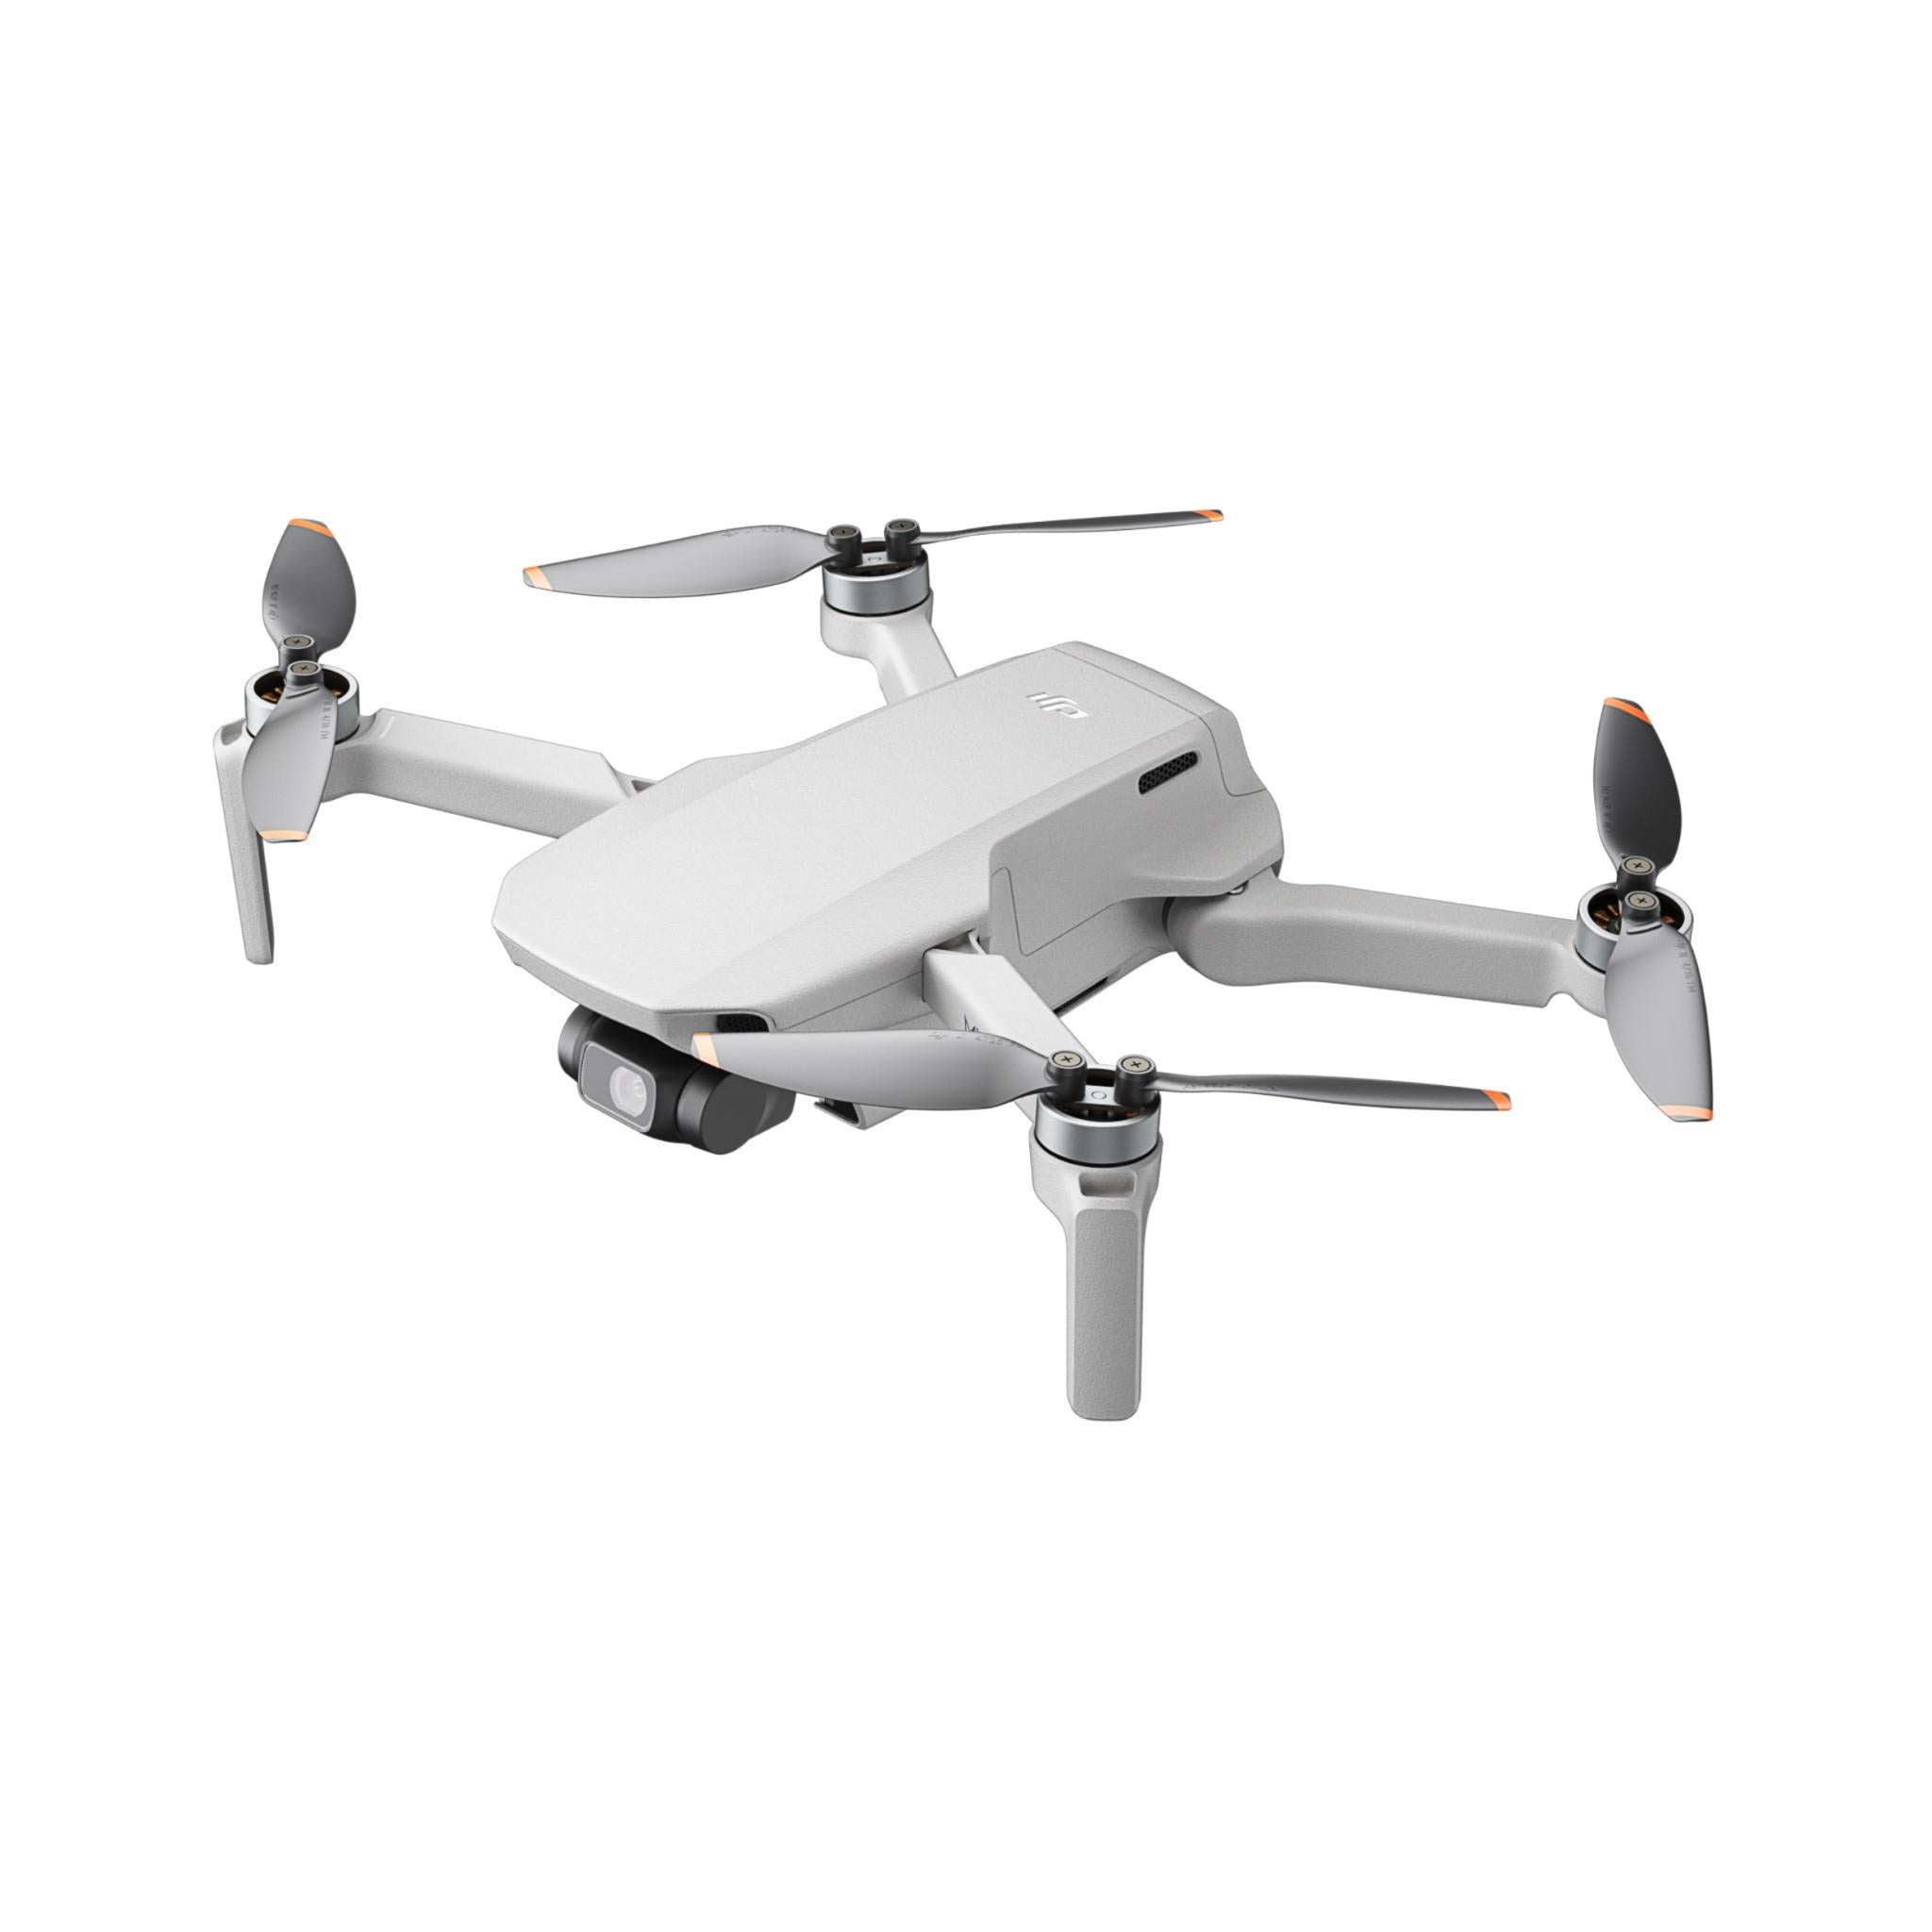 DJI Mini 2 SE, Lightweight and Foldable Mini Camera Drone with 2.7K Video, Intelligent Modes, 10km Video Transmission, 31-min Flight Time, Under 249 g, Easy to Use, Photo-Shooting Tour, Street Snap